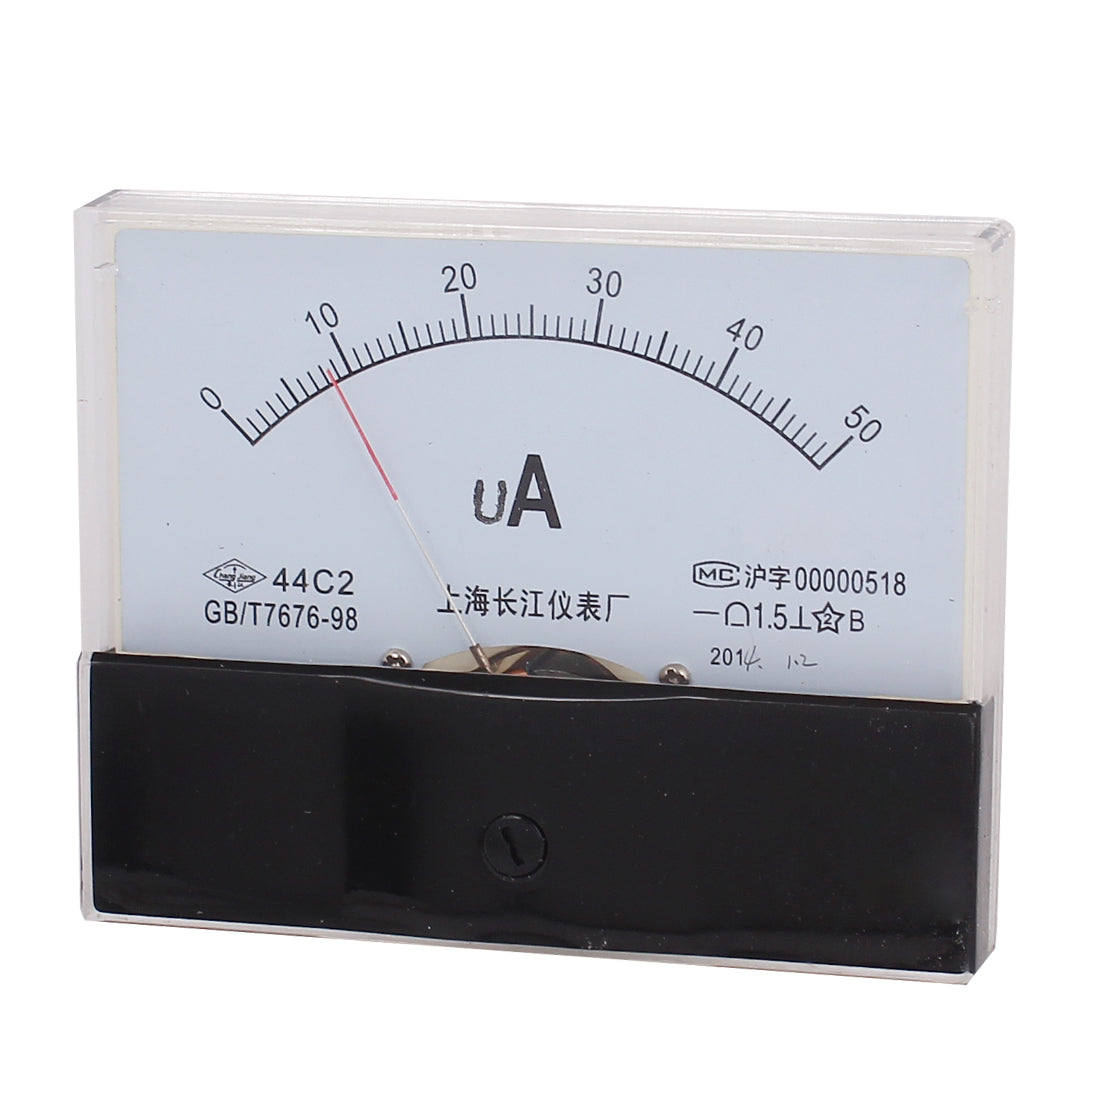 uxcell Uxcell DC 0-50uA Class 1.5 Accuracy Analog Amperemeter Panel Meter Gauge 44C2